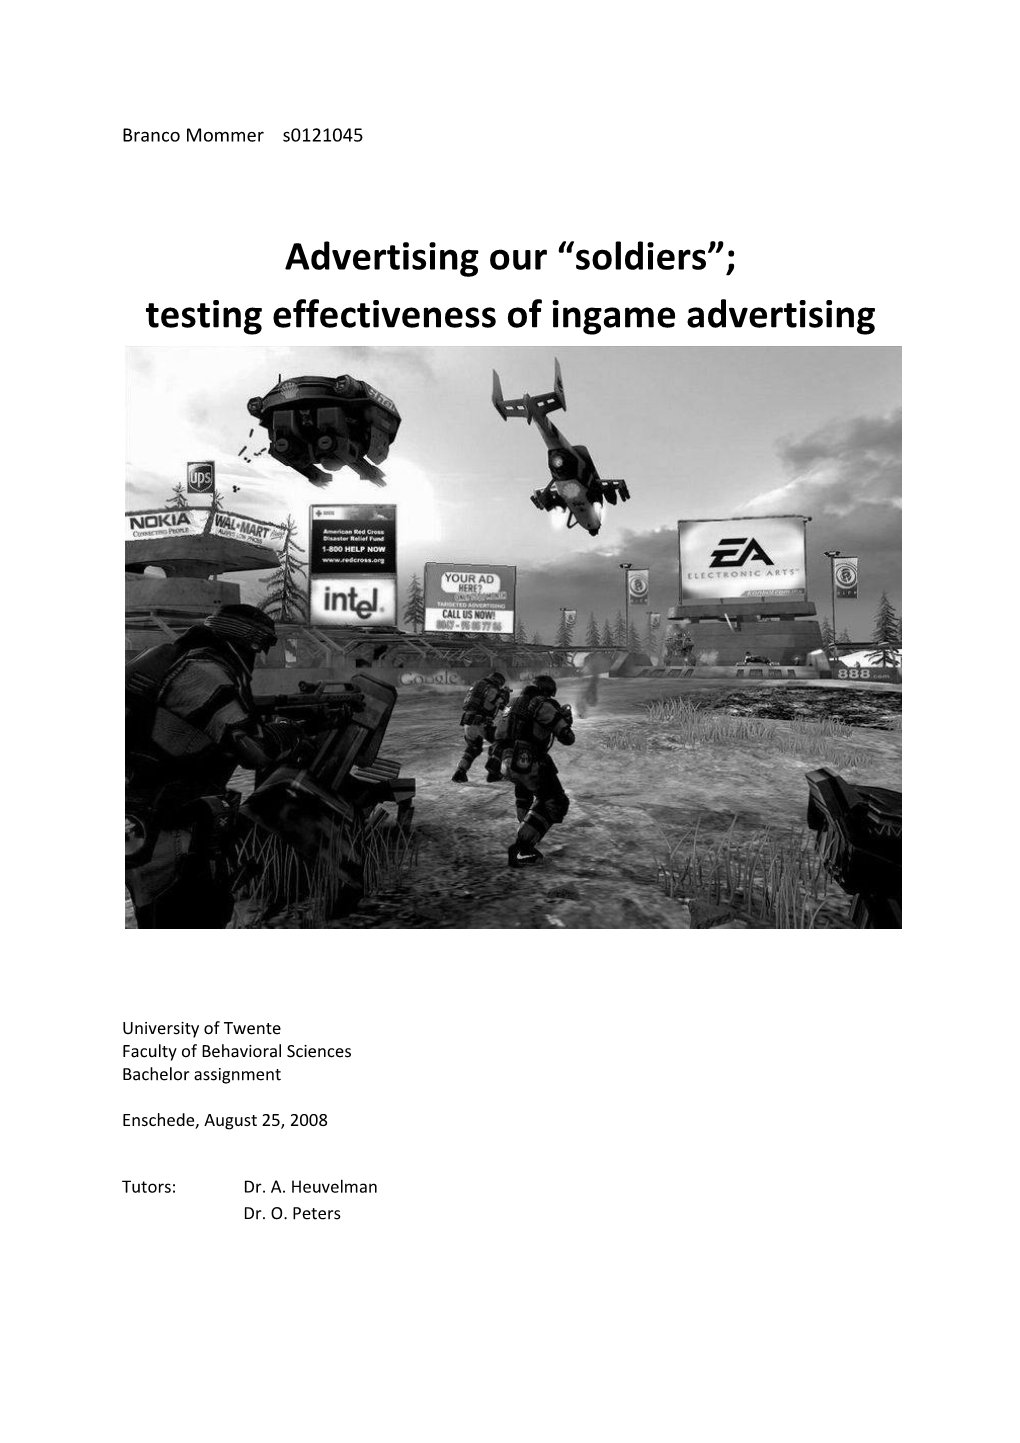 Soldiers”; Sting Effectiveness of Ingame Advertising